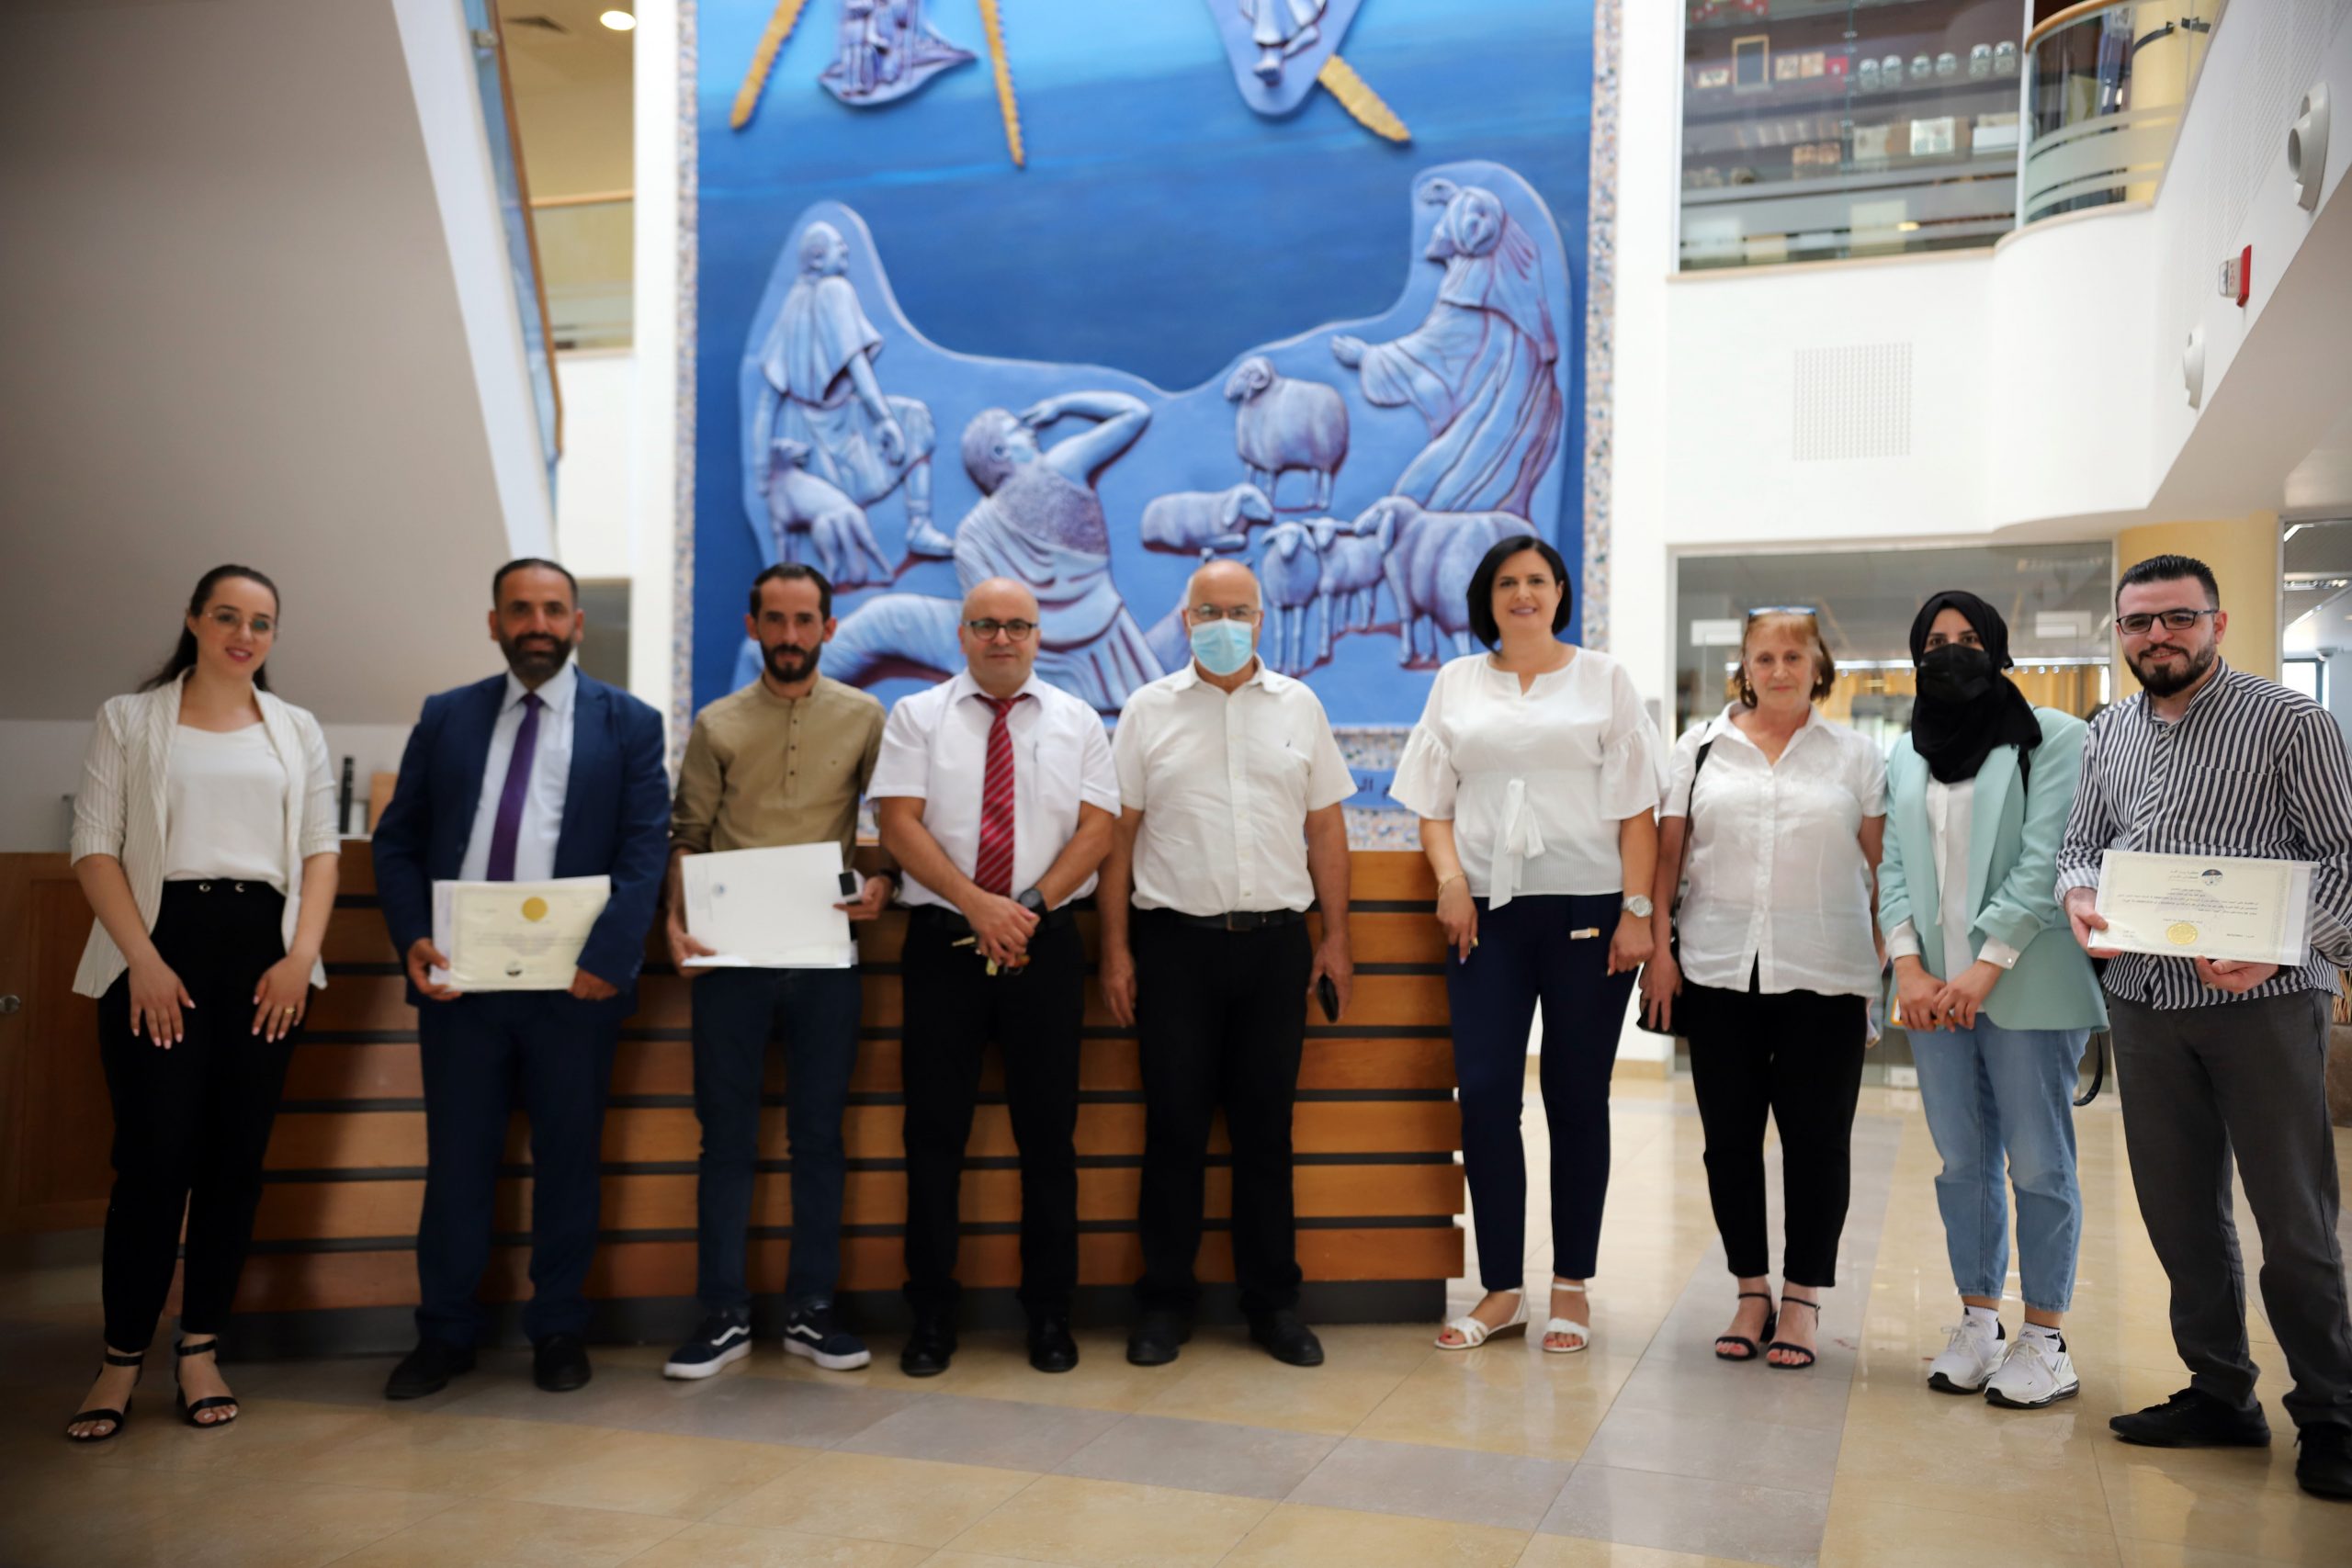 Graduation of the First Cohort of Students from the Professional Diploma Program in Hebrew